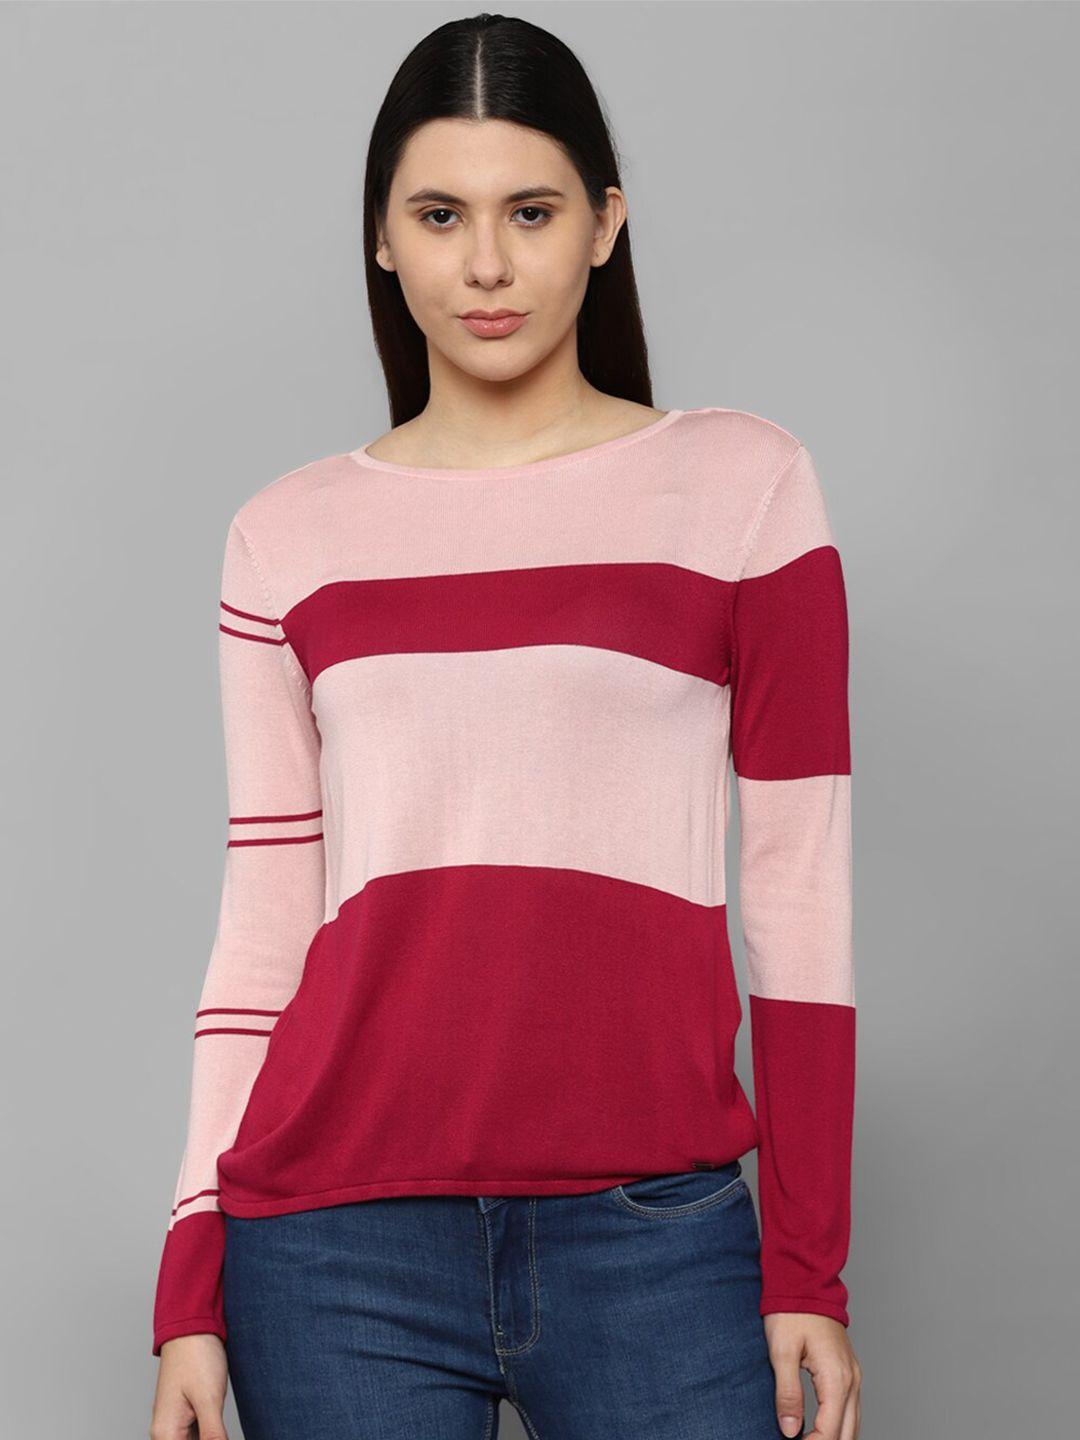 allen solly woman pink striped top